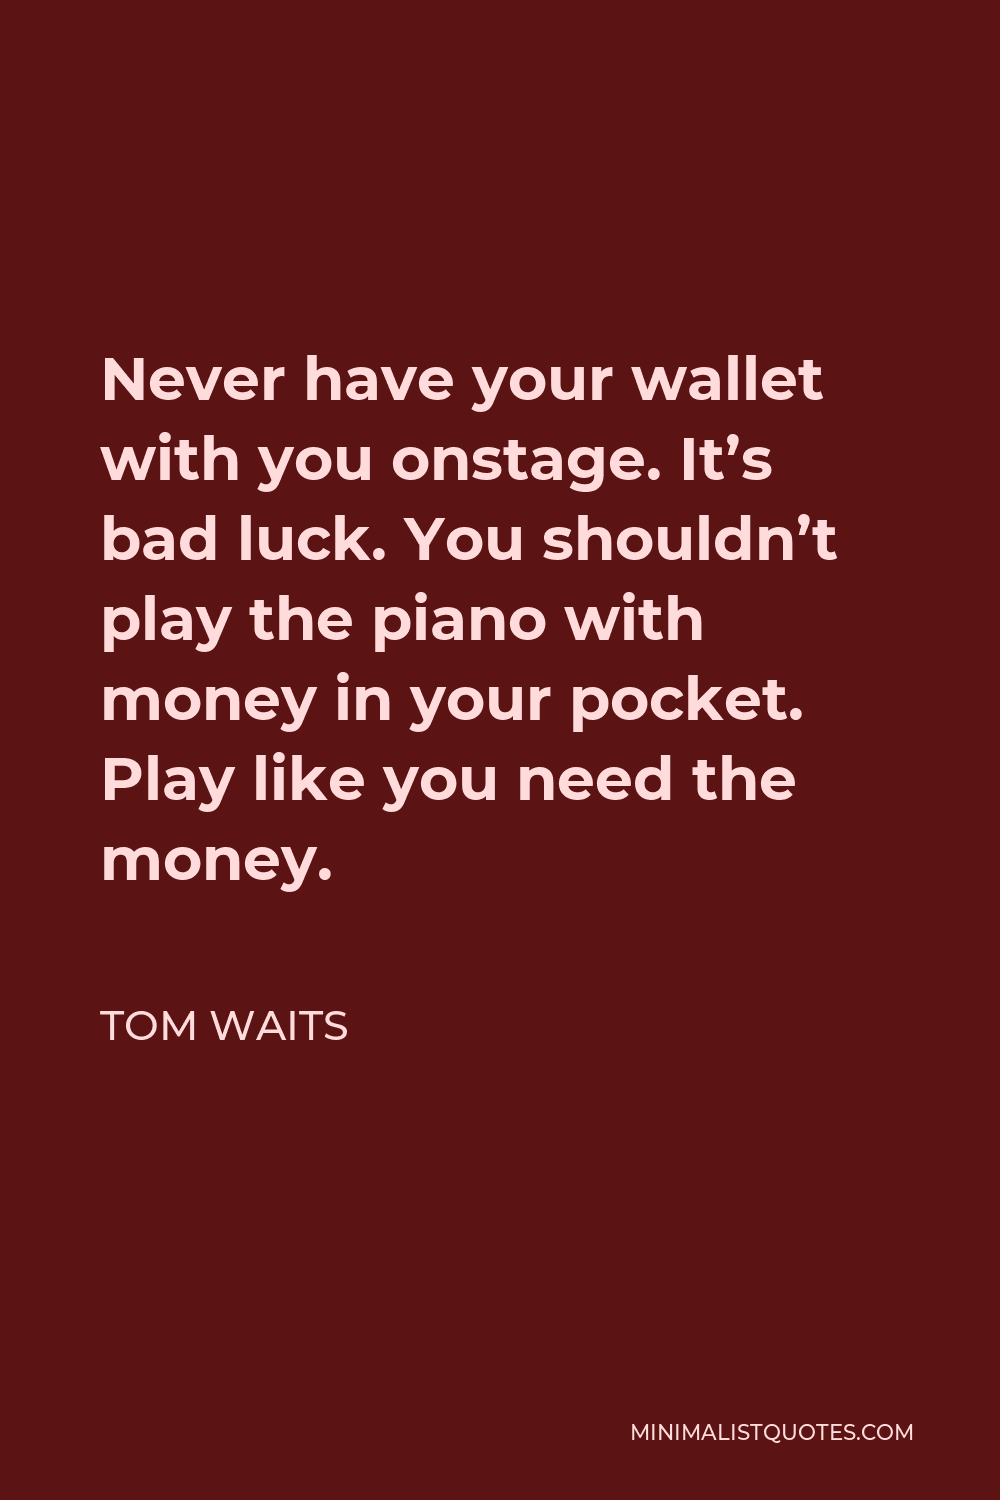 Tom Waits Quote - Never have your wallet with you onstage. It’s bad luck. You shouldn’t play the piano with money in your pocket. Play like you need the money.